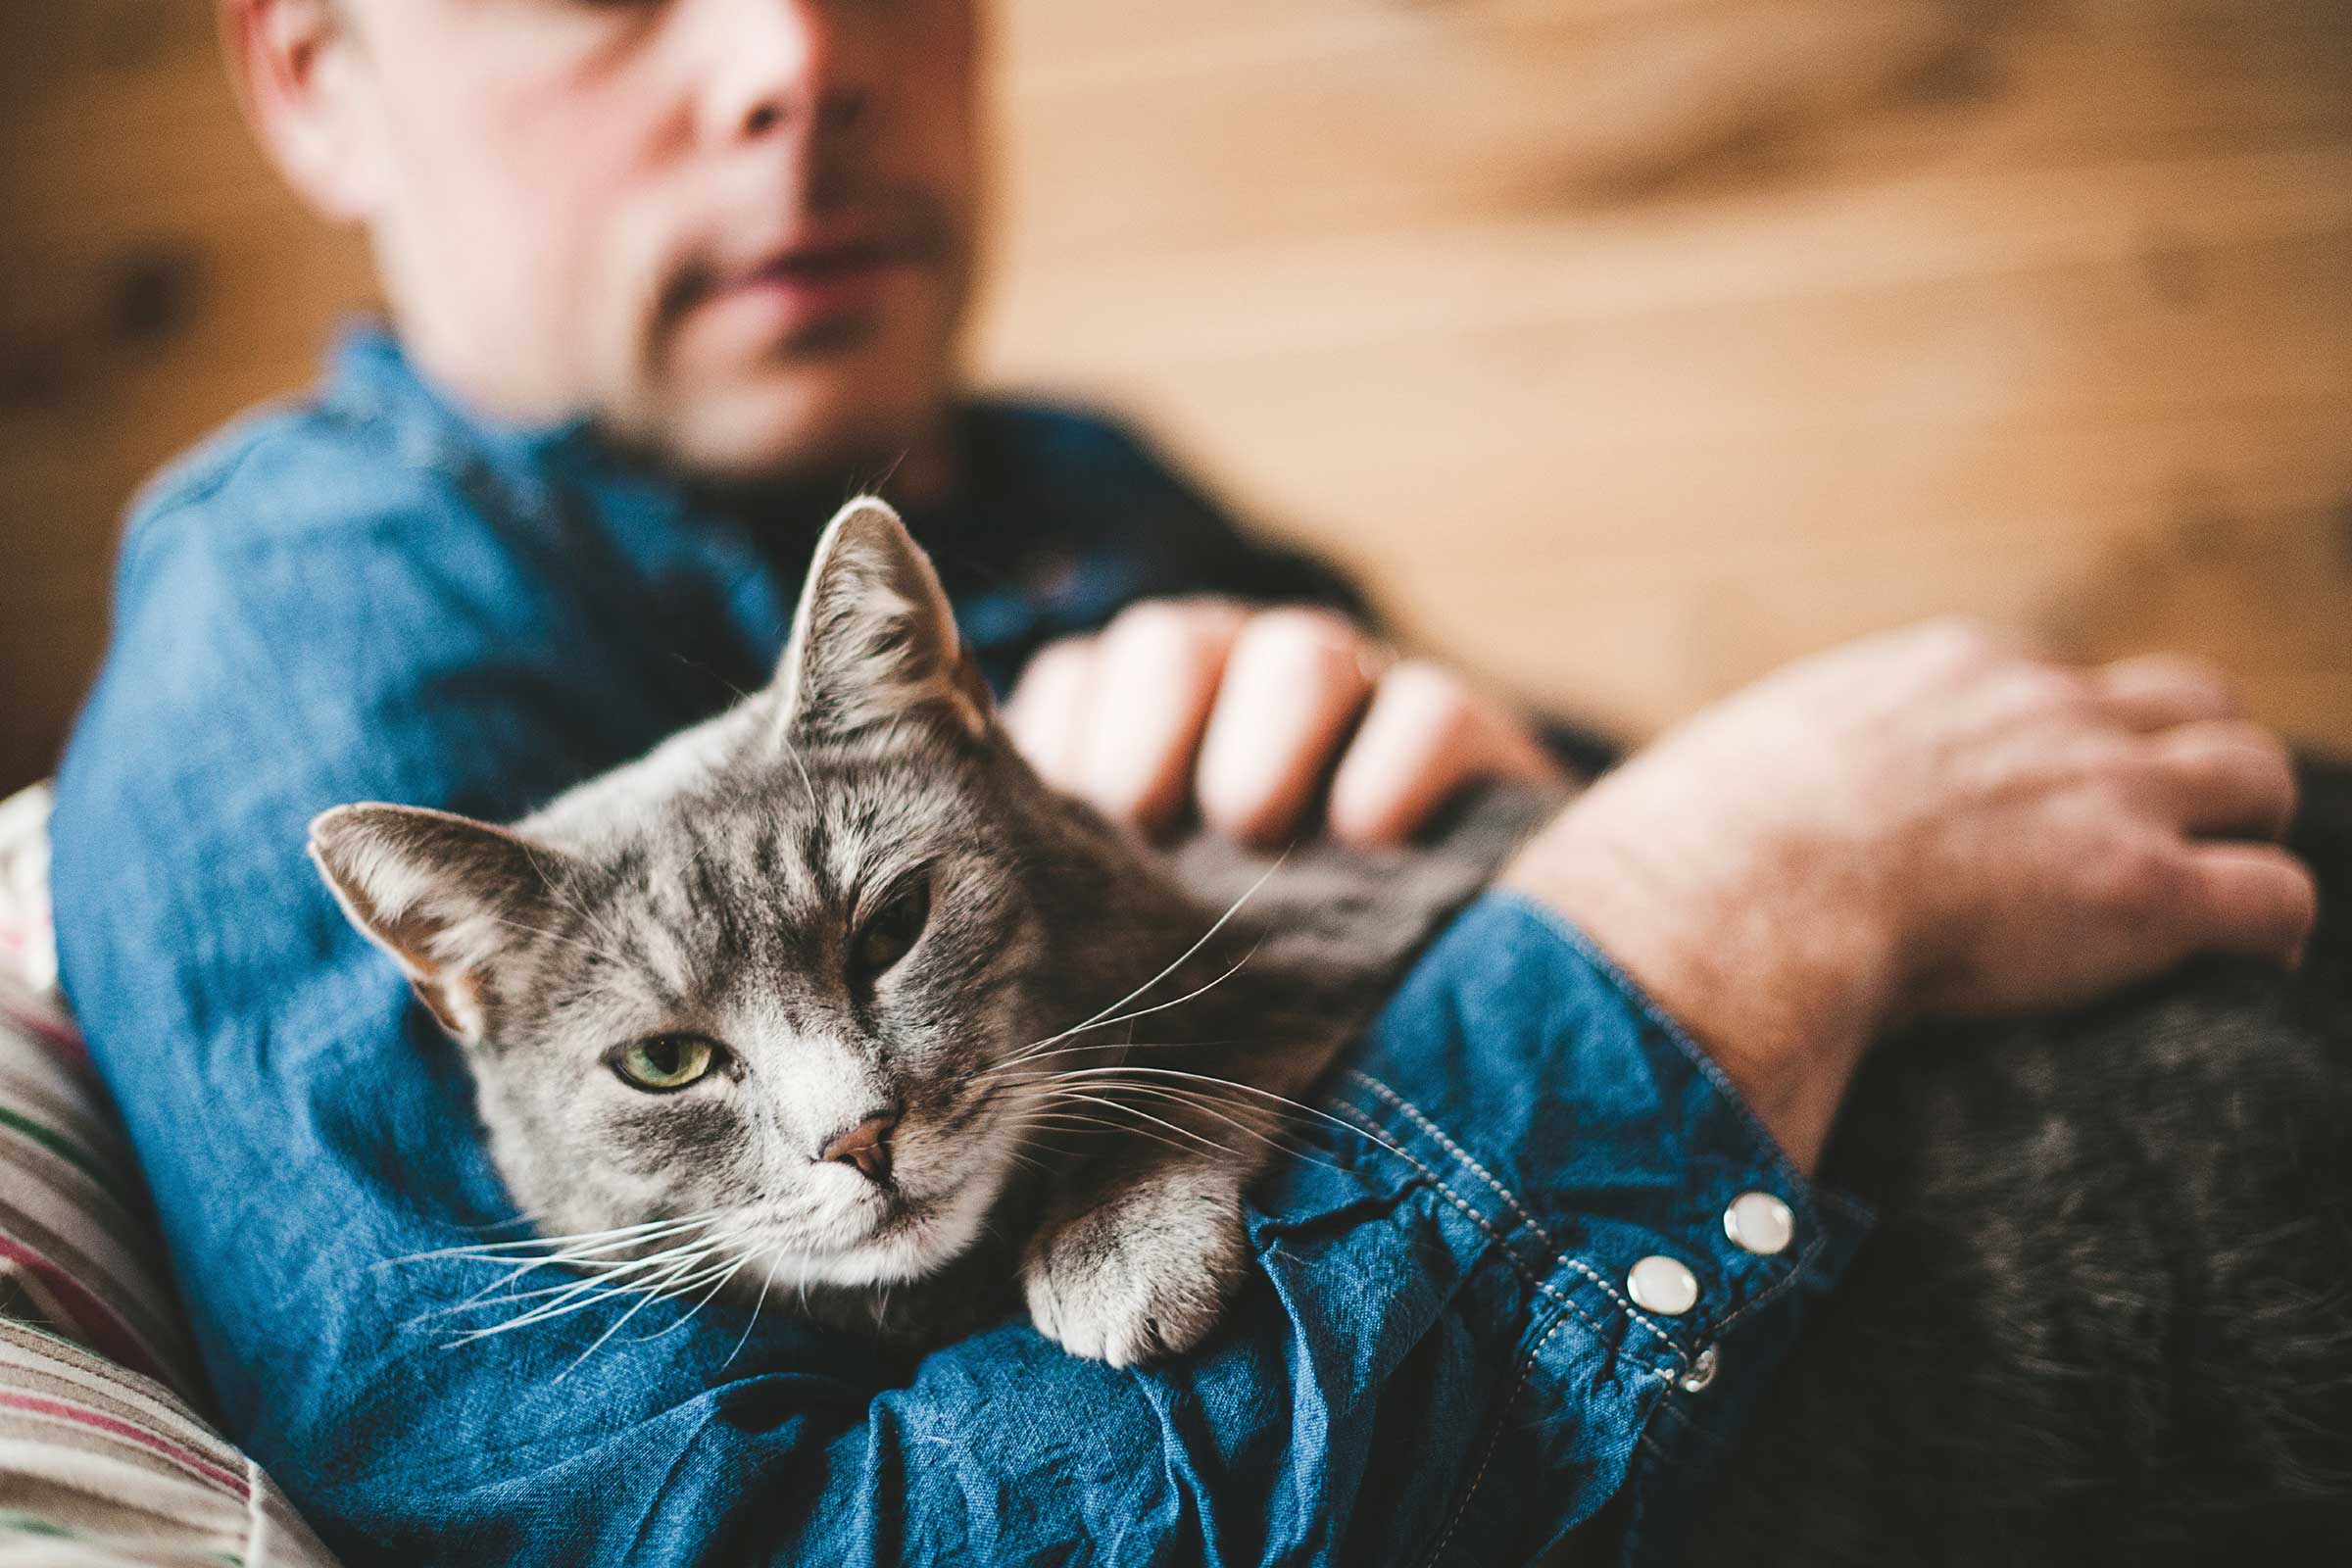 Should you allow pets in your rental property?